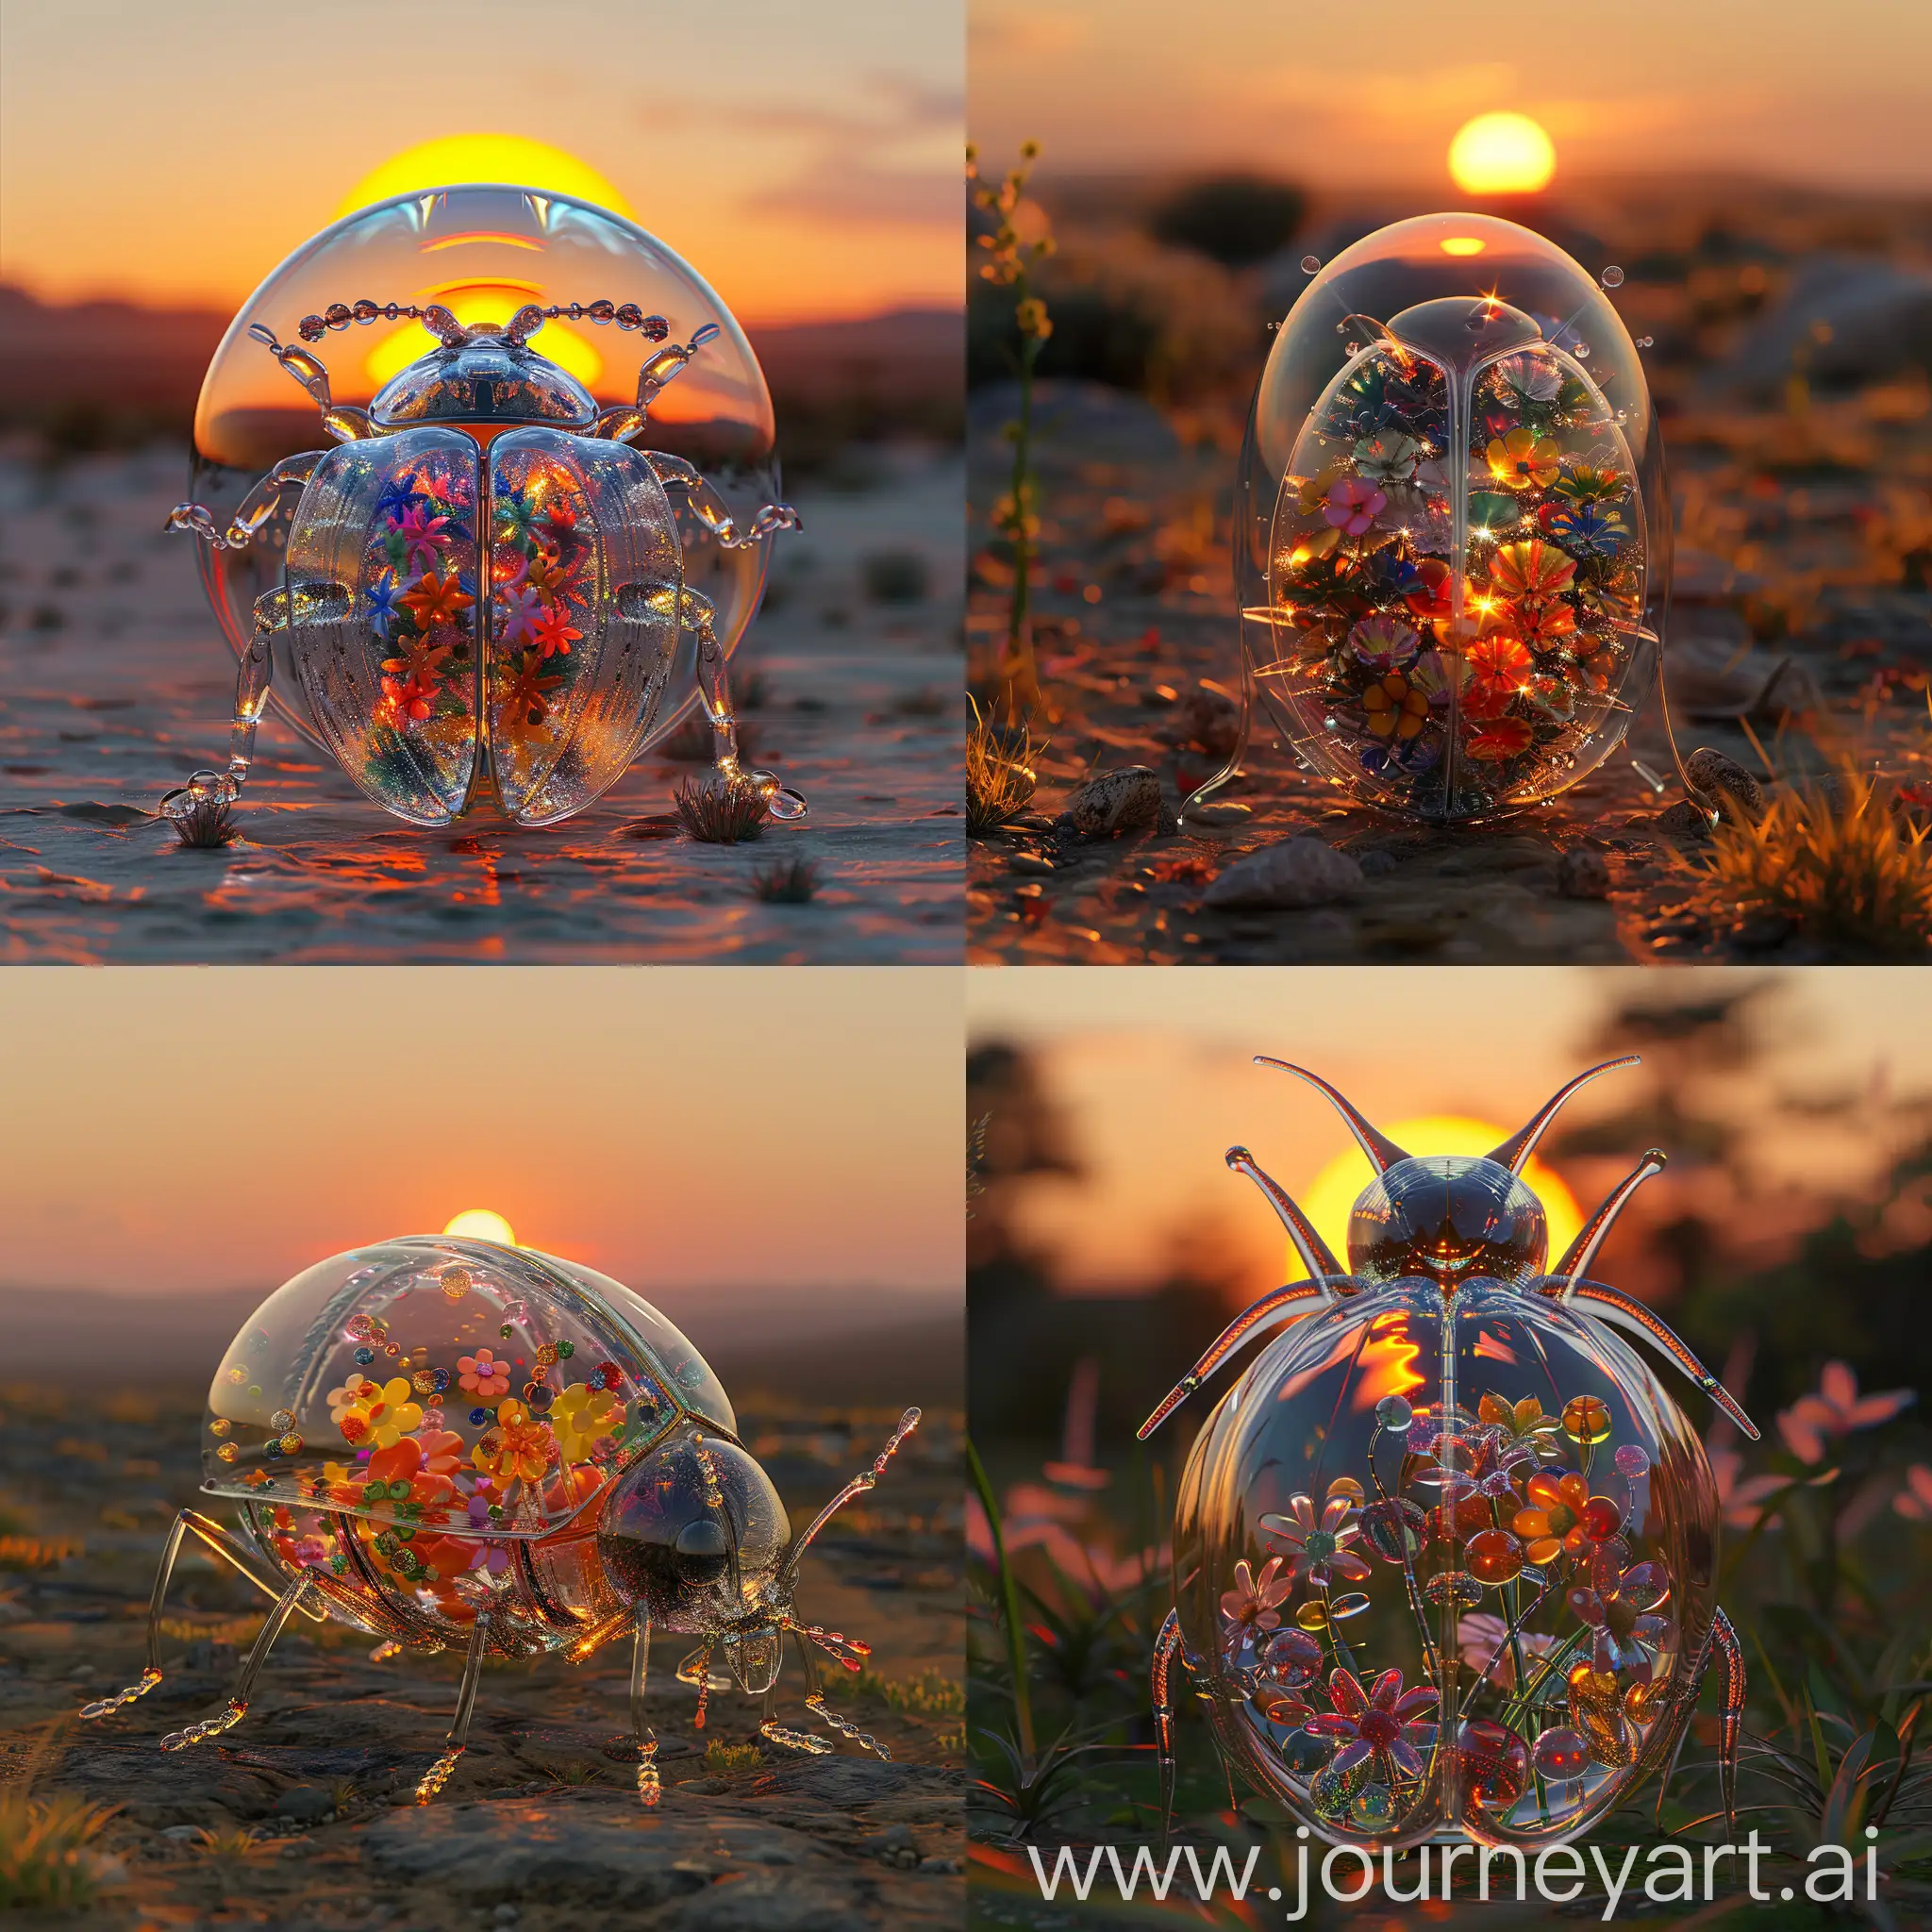 Hyperrealistic-Glass-Insect-Beetle-with-Multicolored-Flowers-in-ZenInspired-Atmosphere